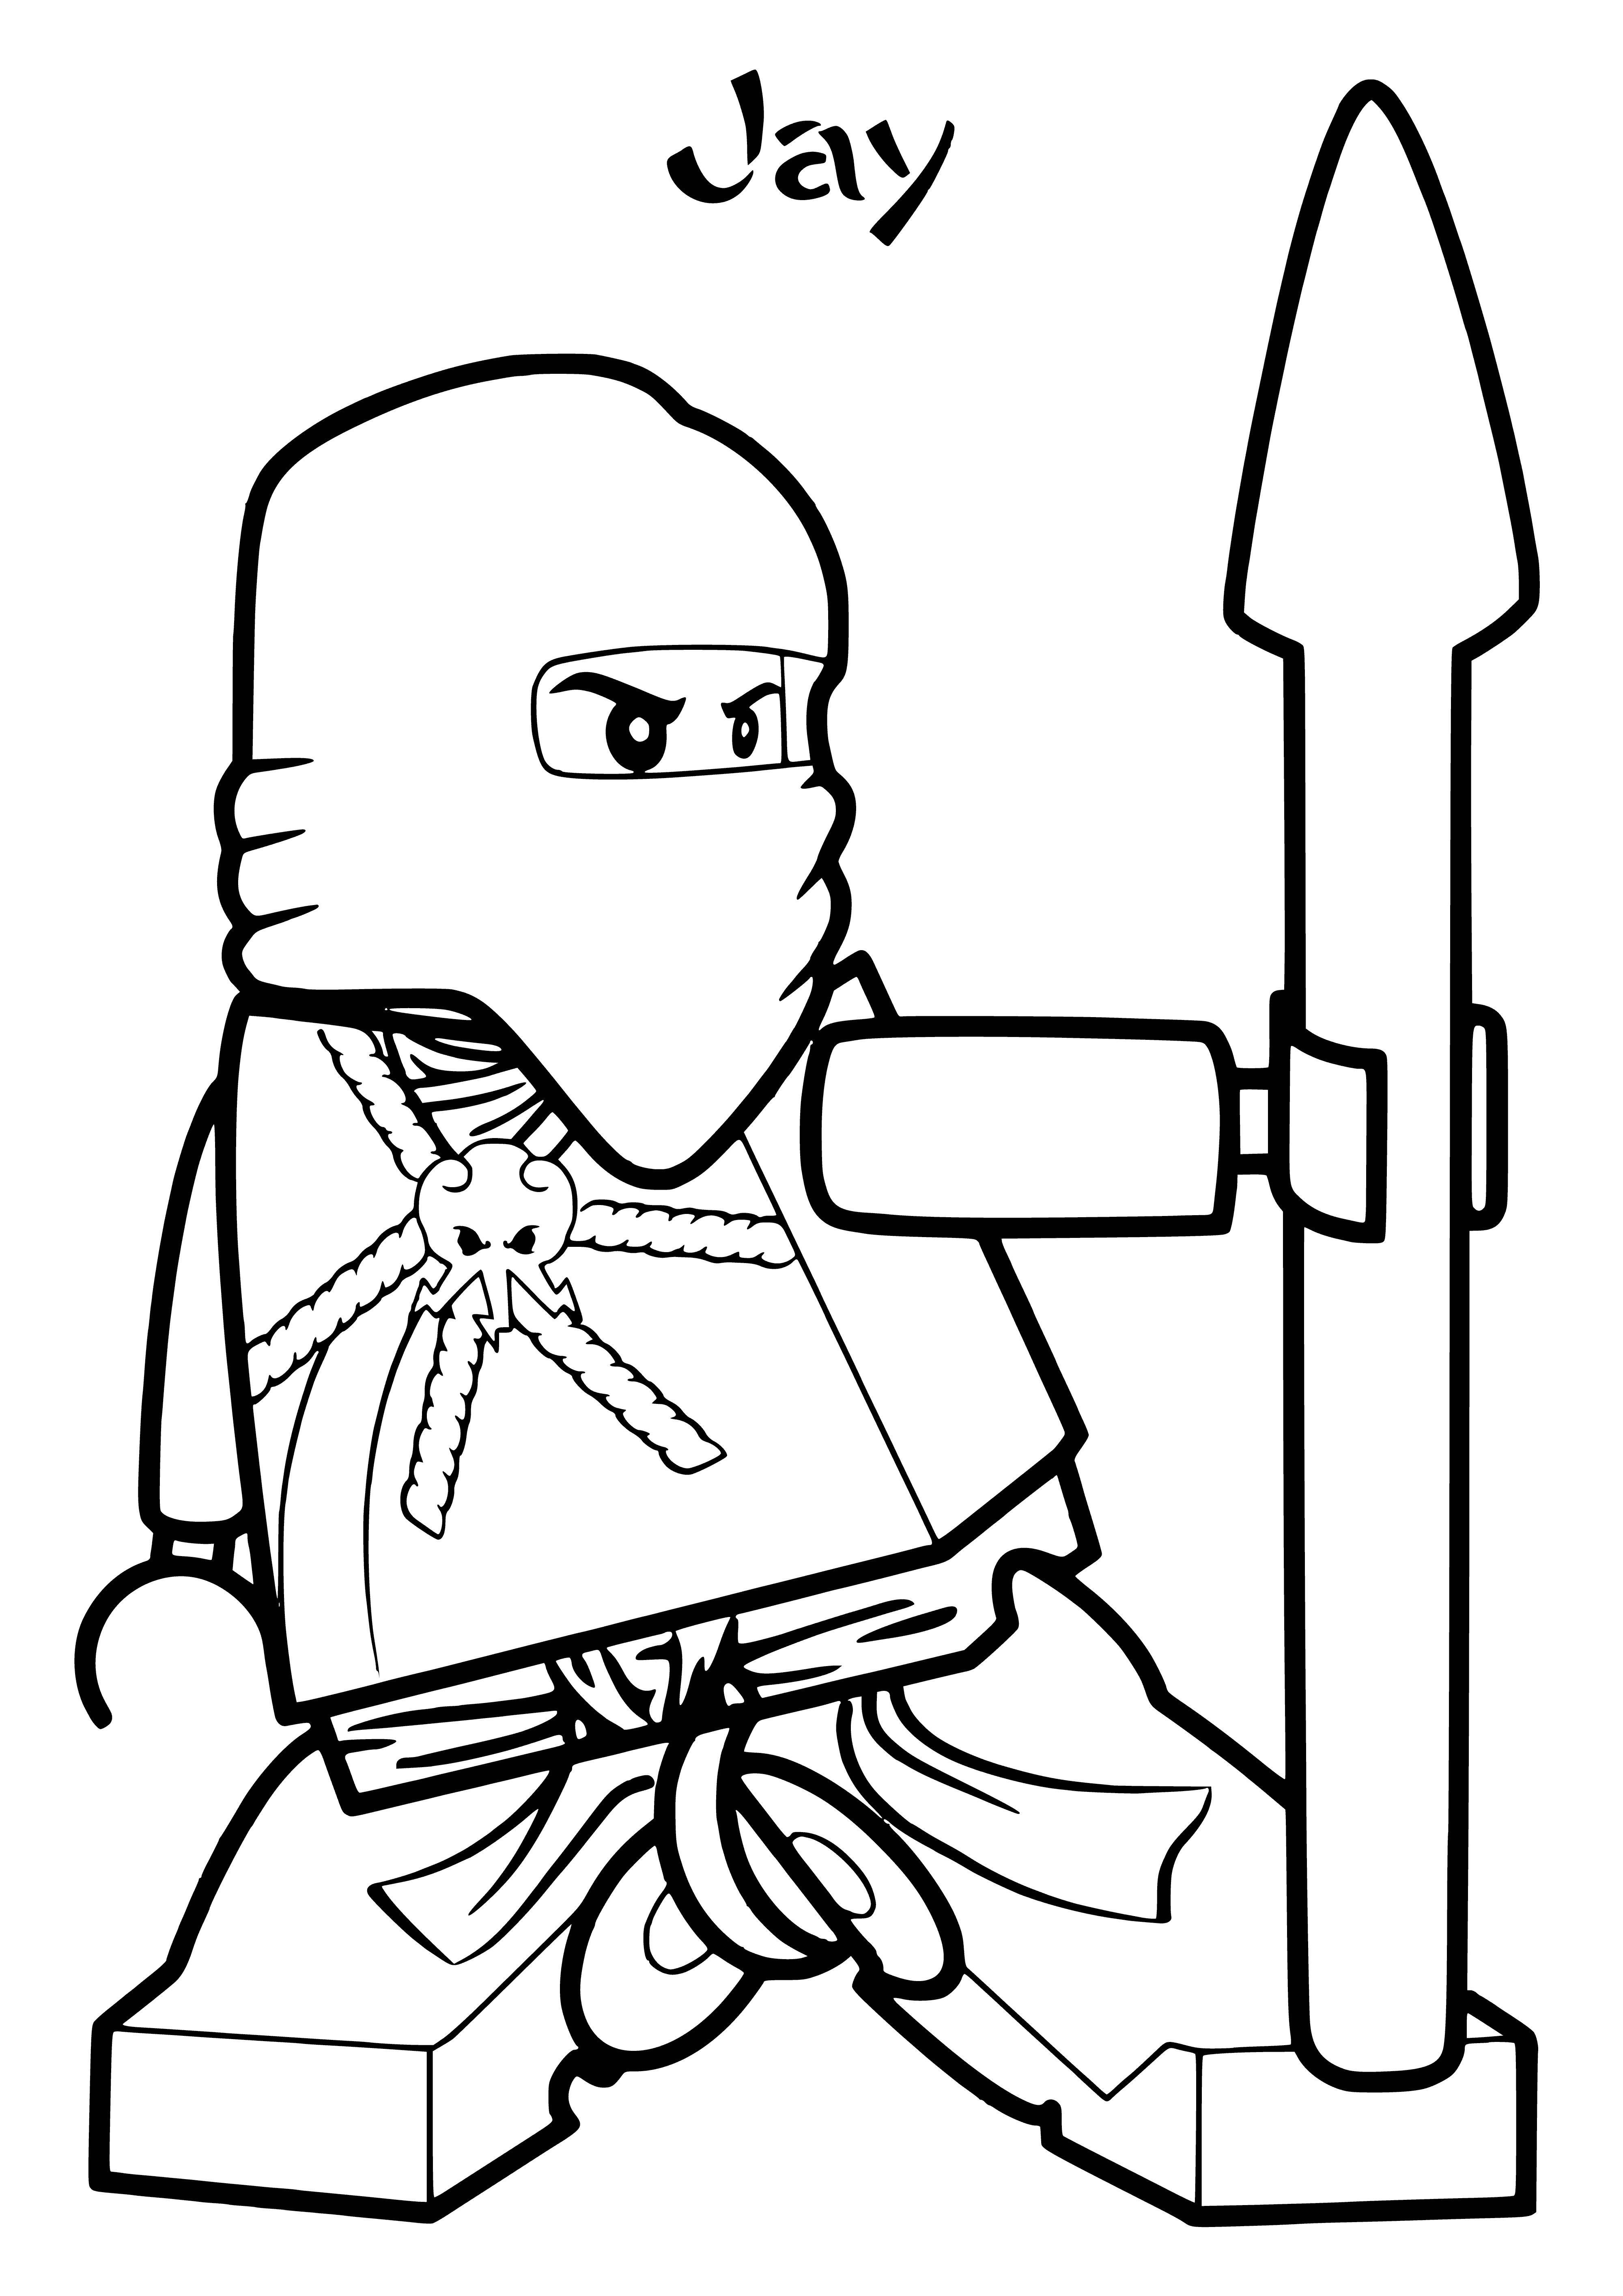 coloring page: Jay in blue ninja attire stands in a jungle, sword in hand ready to fight.